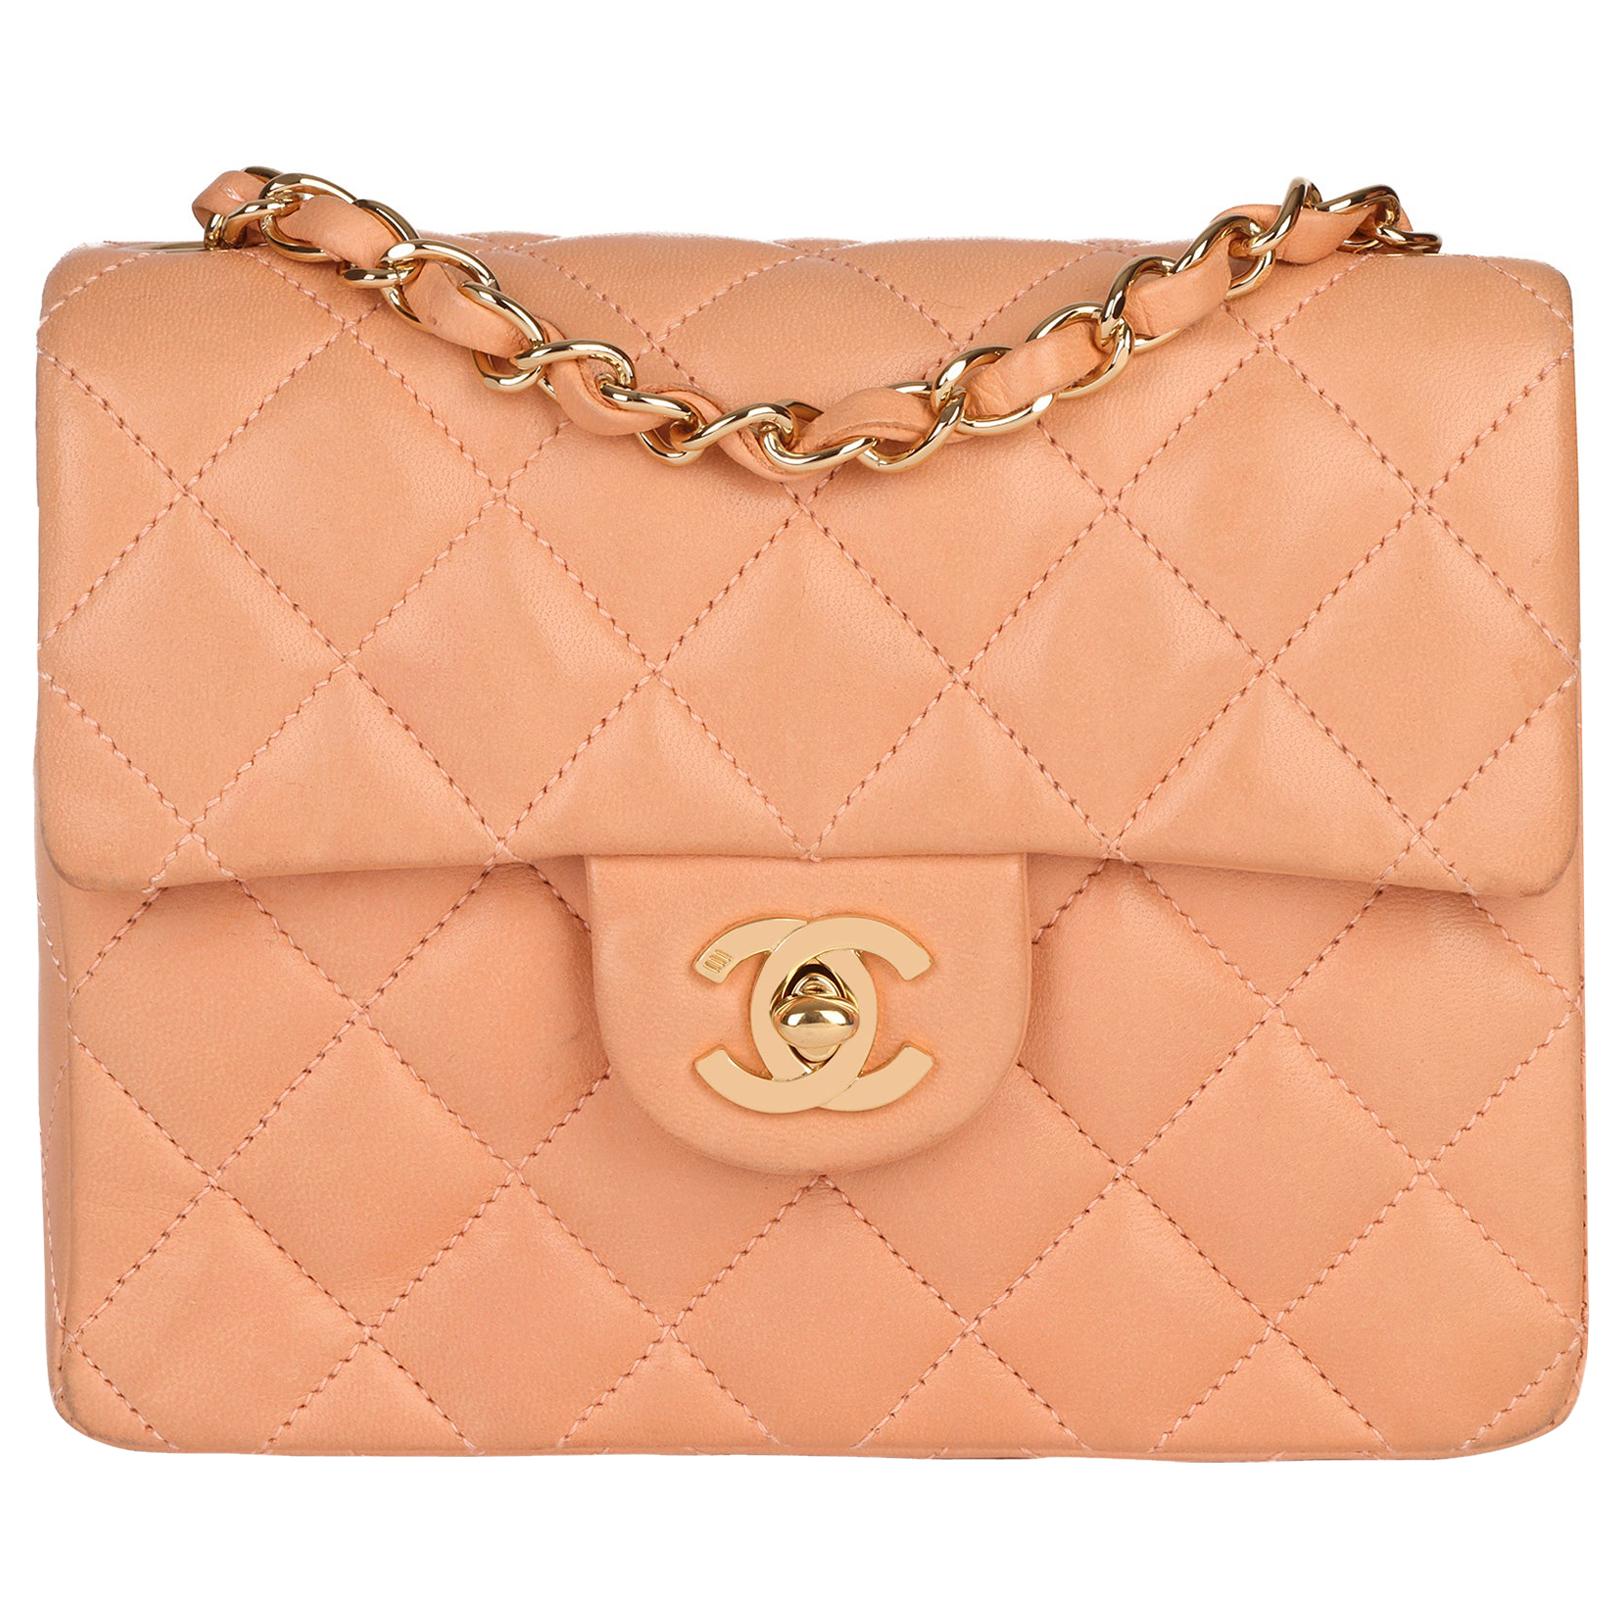 2005 Chanel Peach Quilted Lambskin Leather Vintage Mini Flap